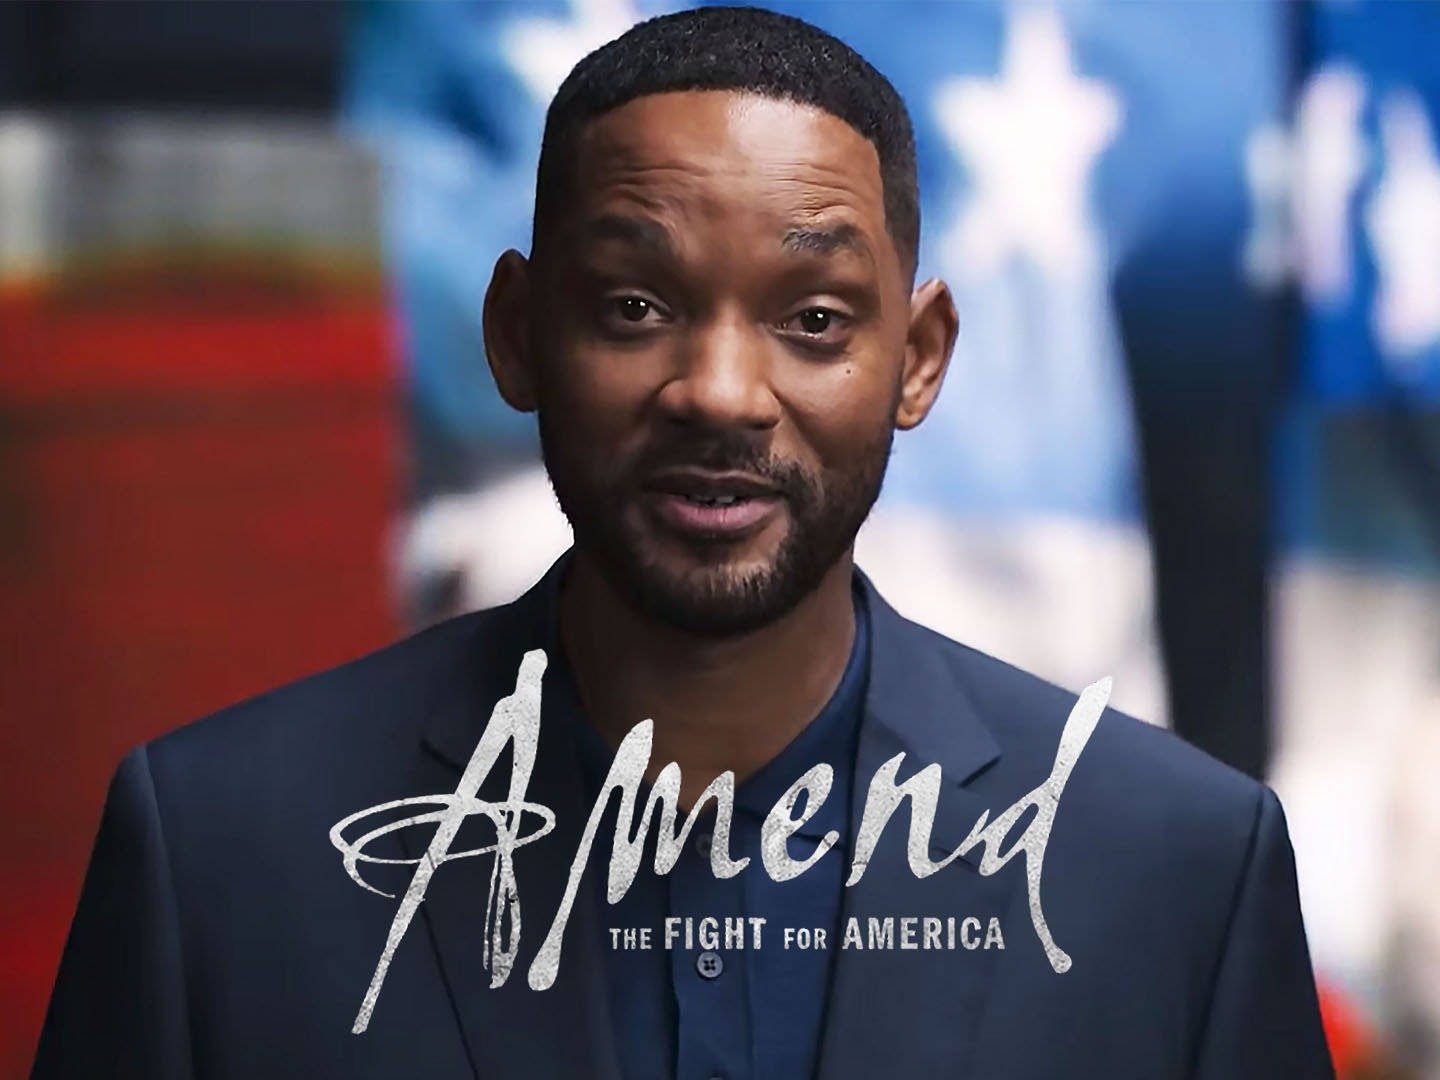 Amend The Fight For America Documentary Series Trailer Rotten Tomatoes 5354